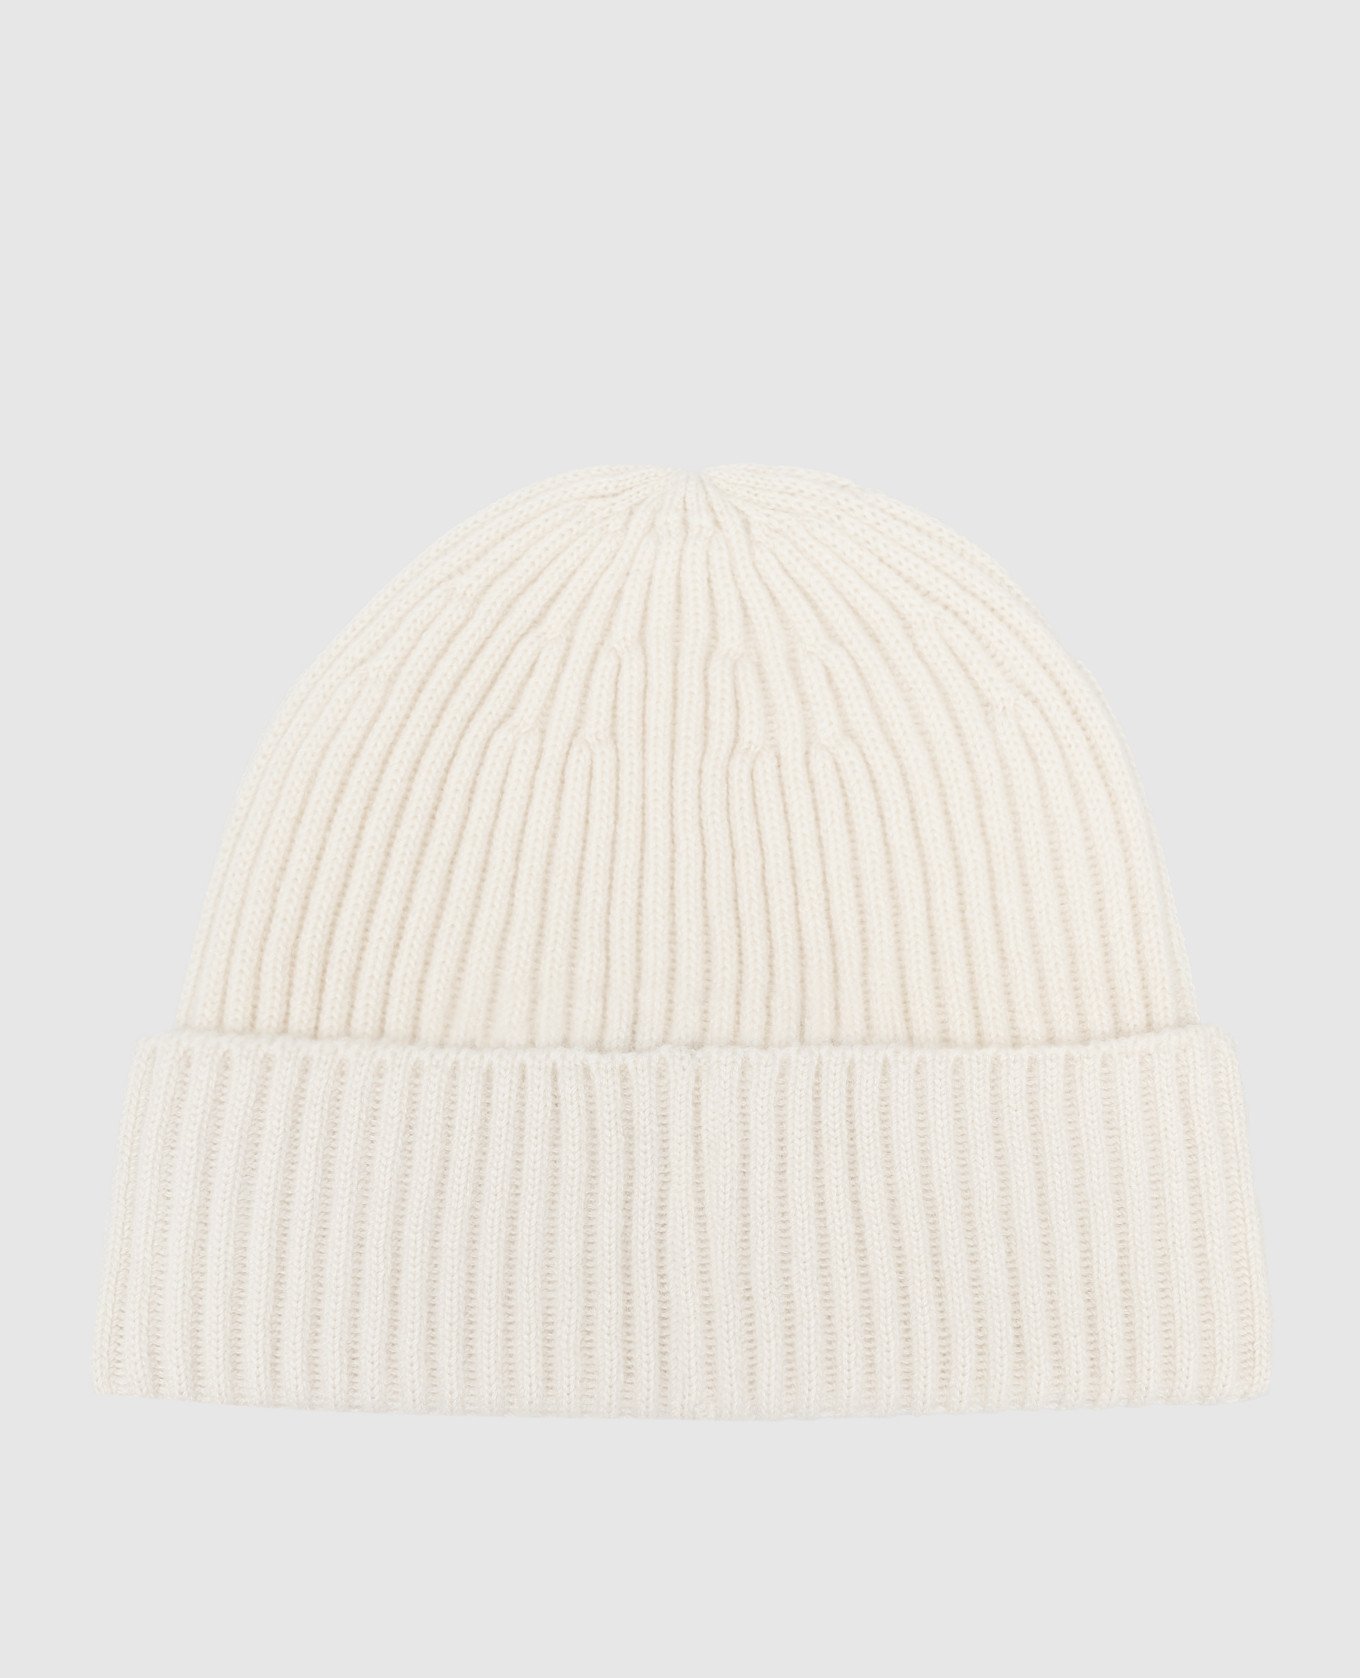 White cashmere hat with a rib